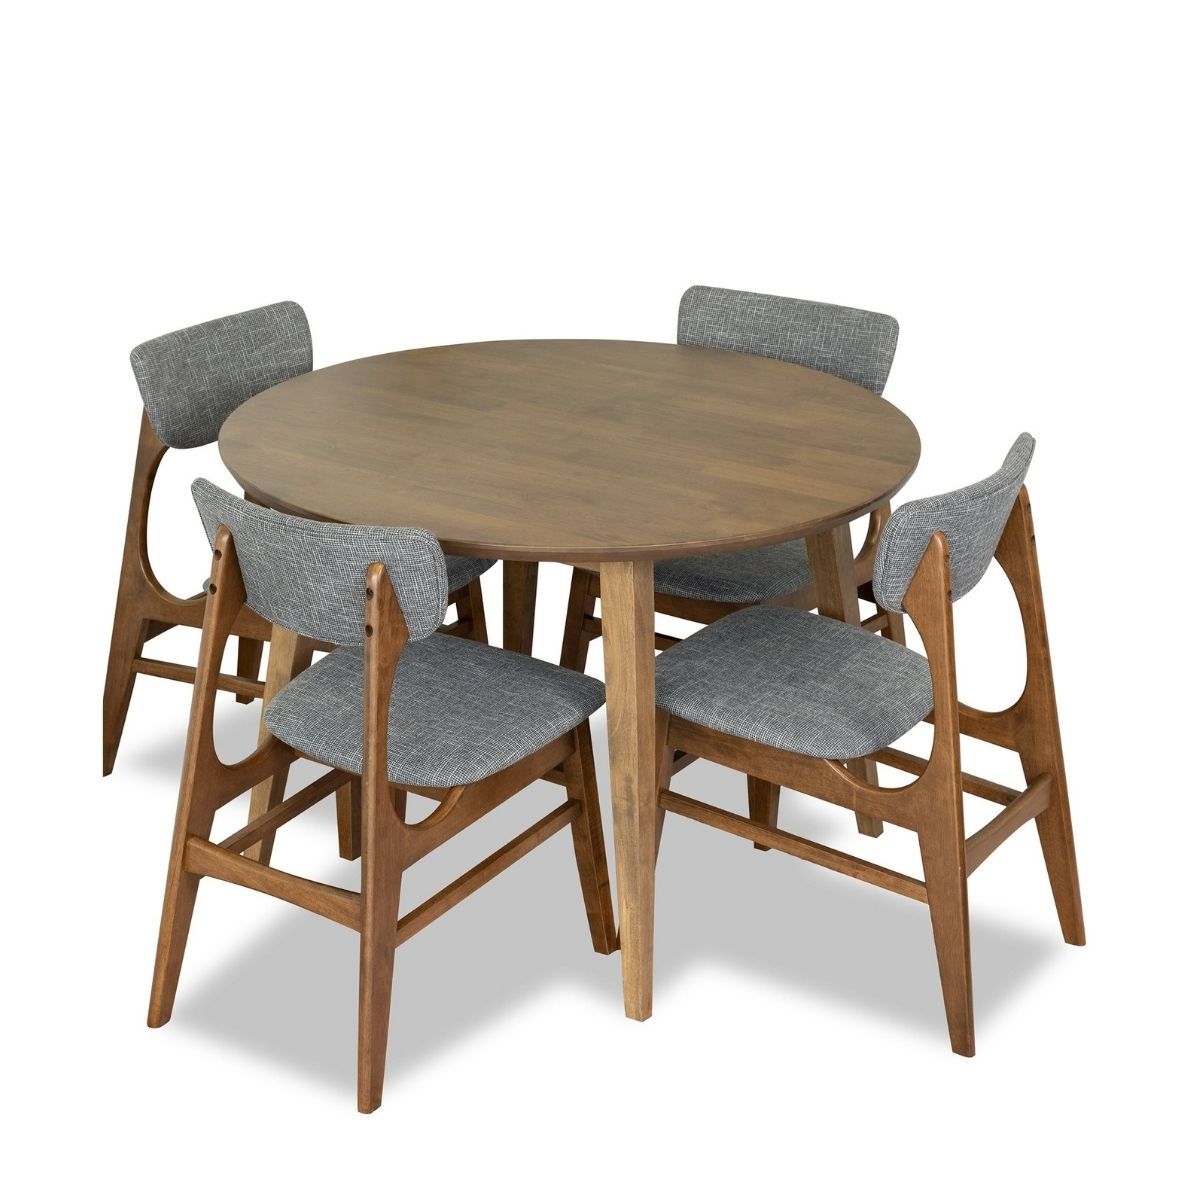 Fiona Dining set with 4 Collins Dining Chairs (Grey) - MidinMod Houston Tx Mid Century Furniture Store - Dining Tables 1